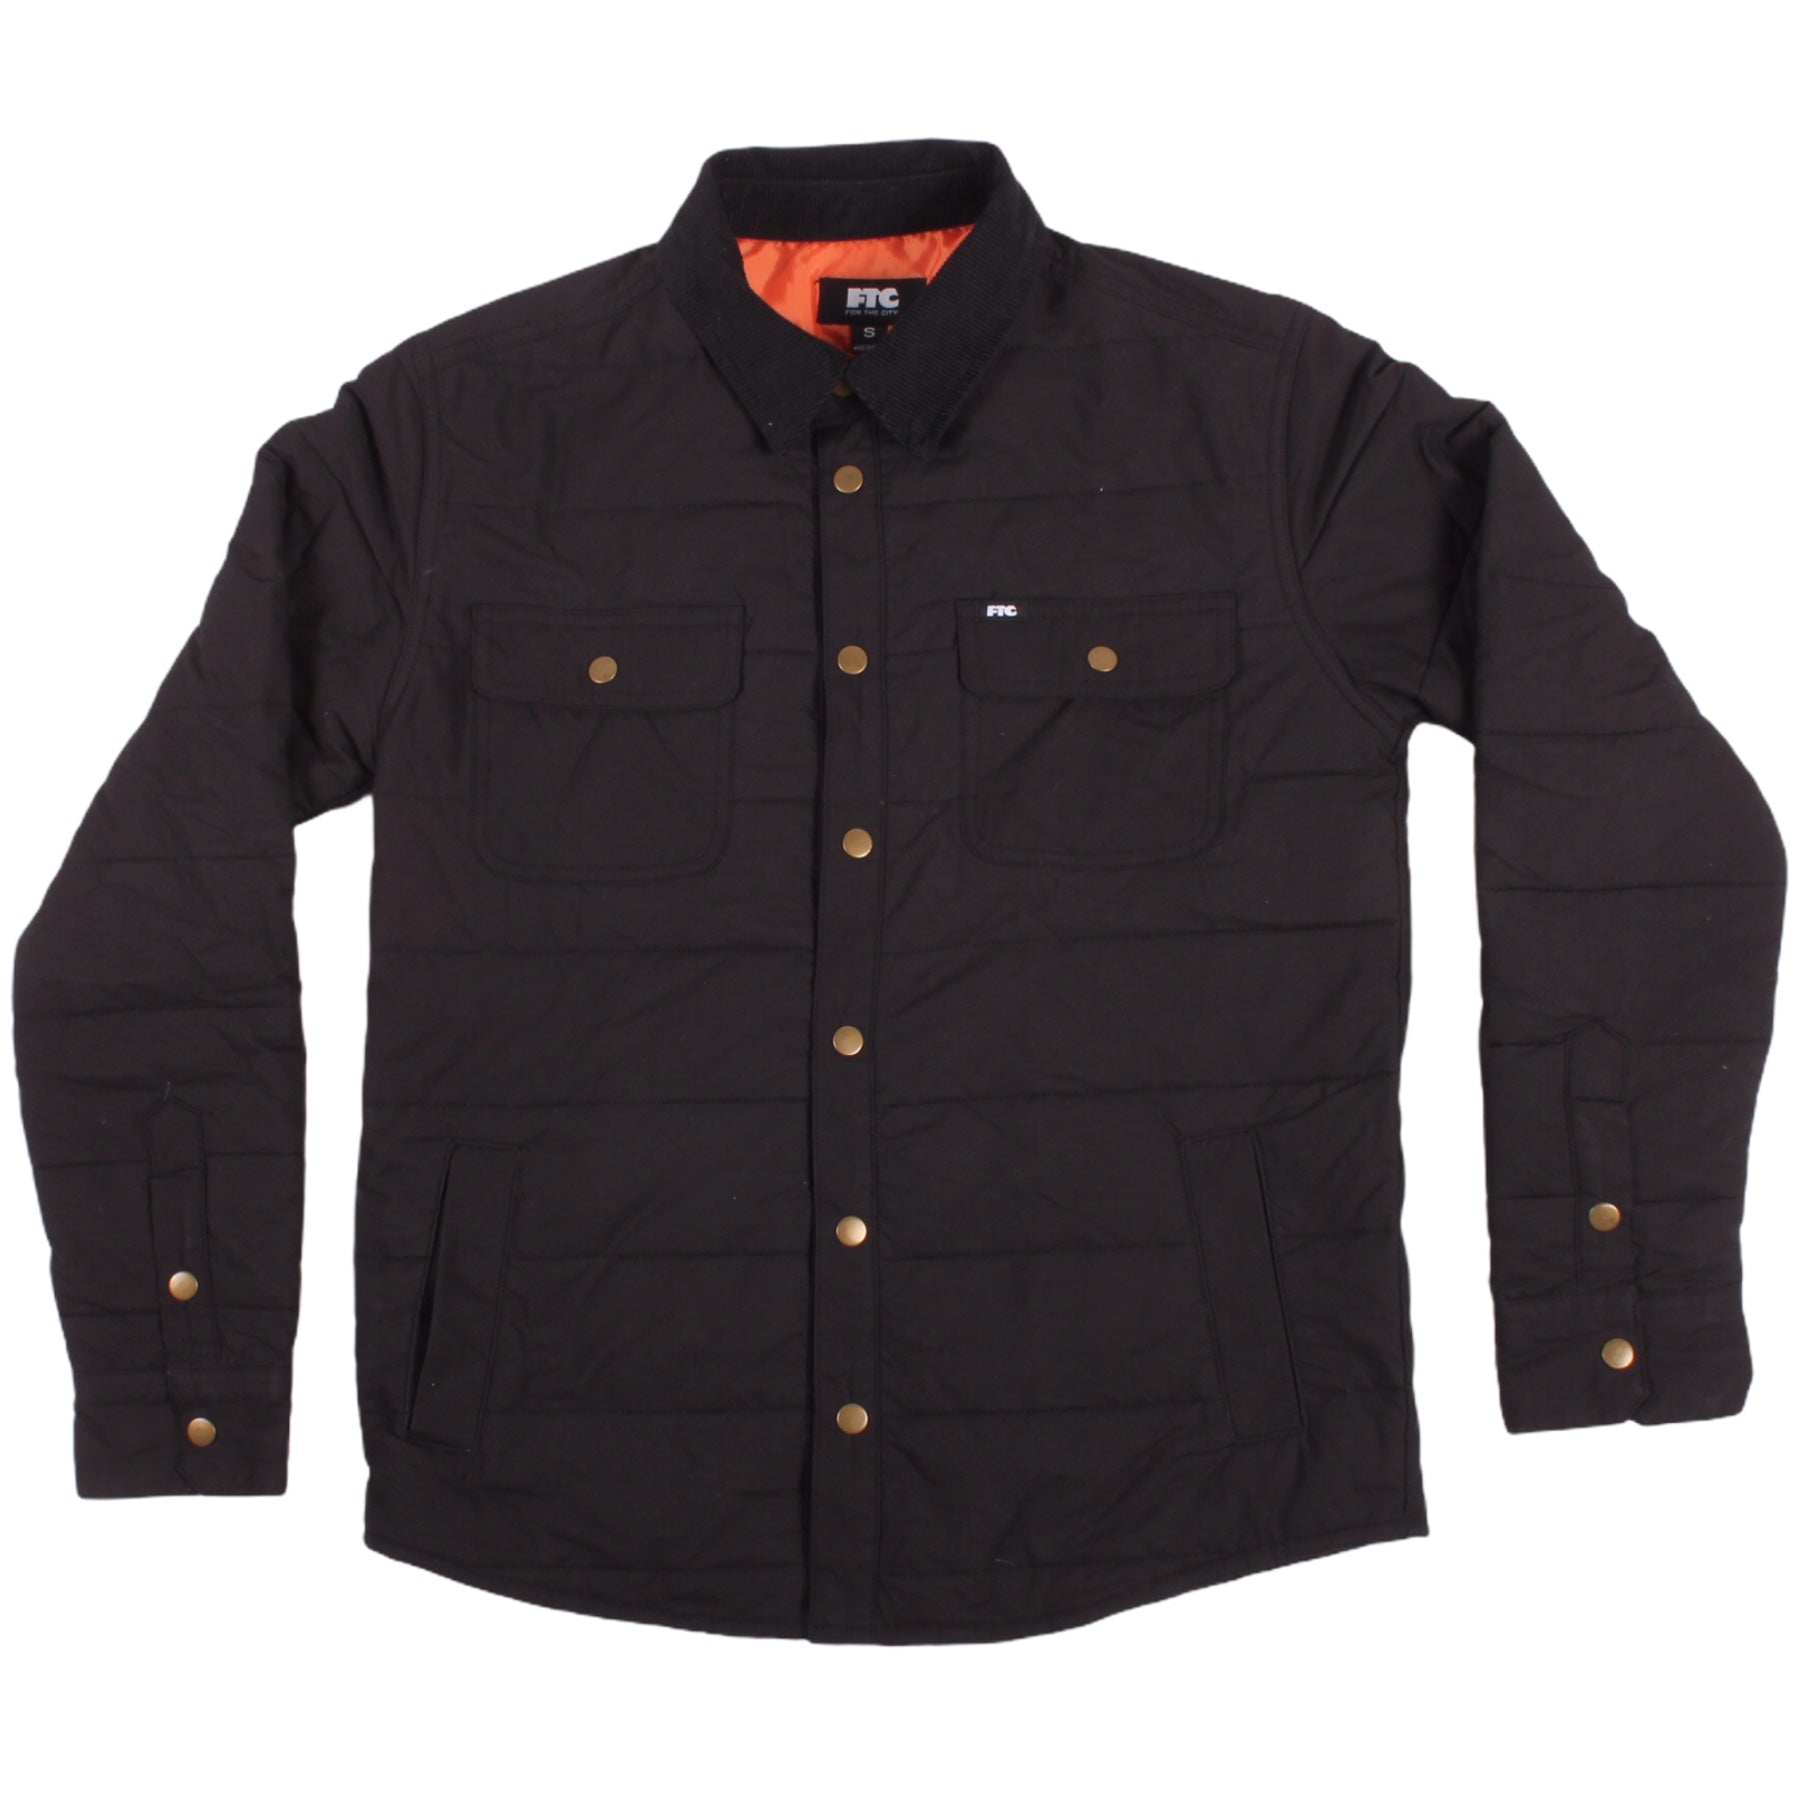 Overripe FTC Quilted Jacket Small - Orchard Skateshop